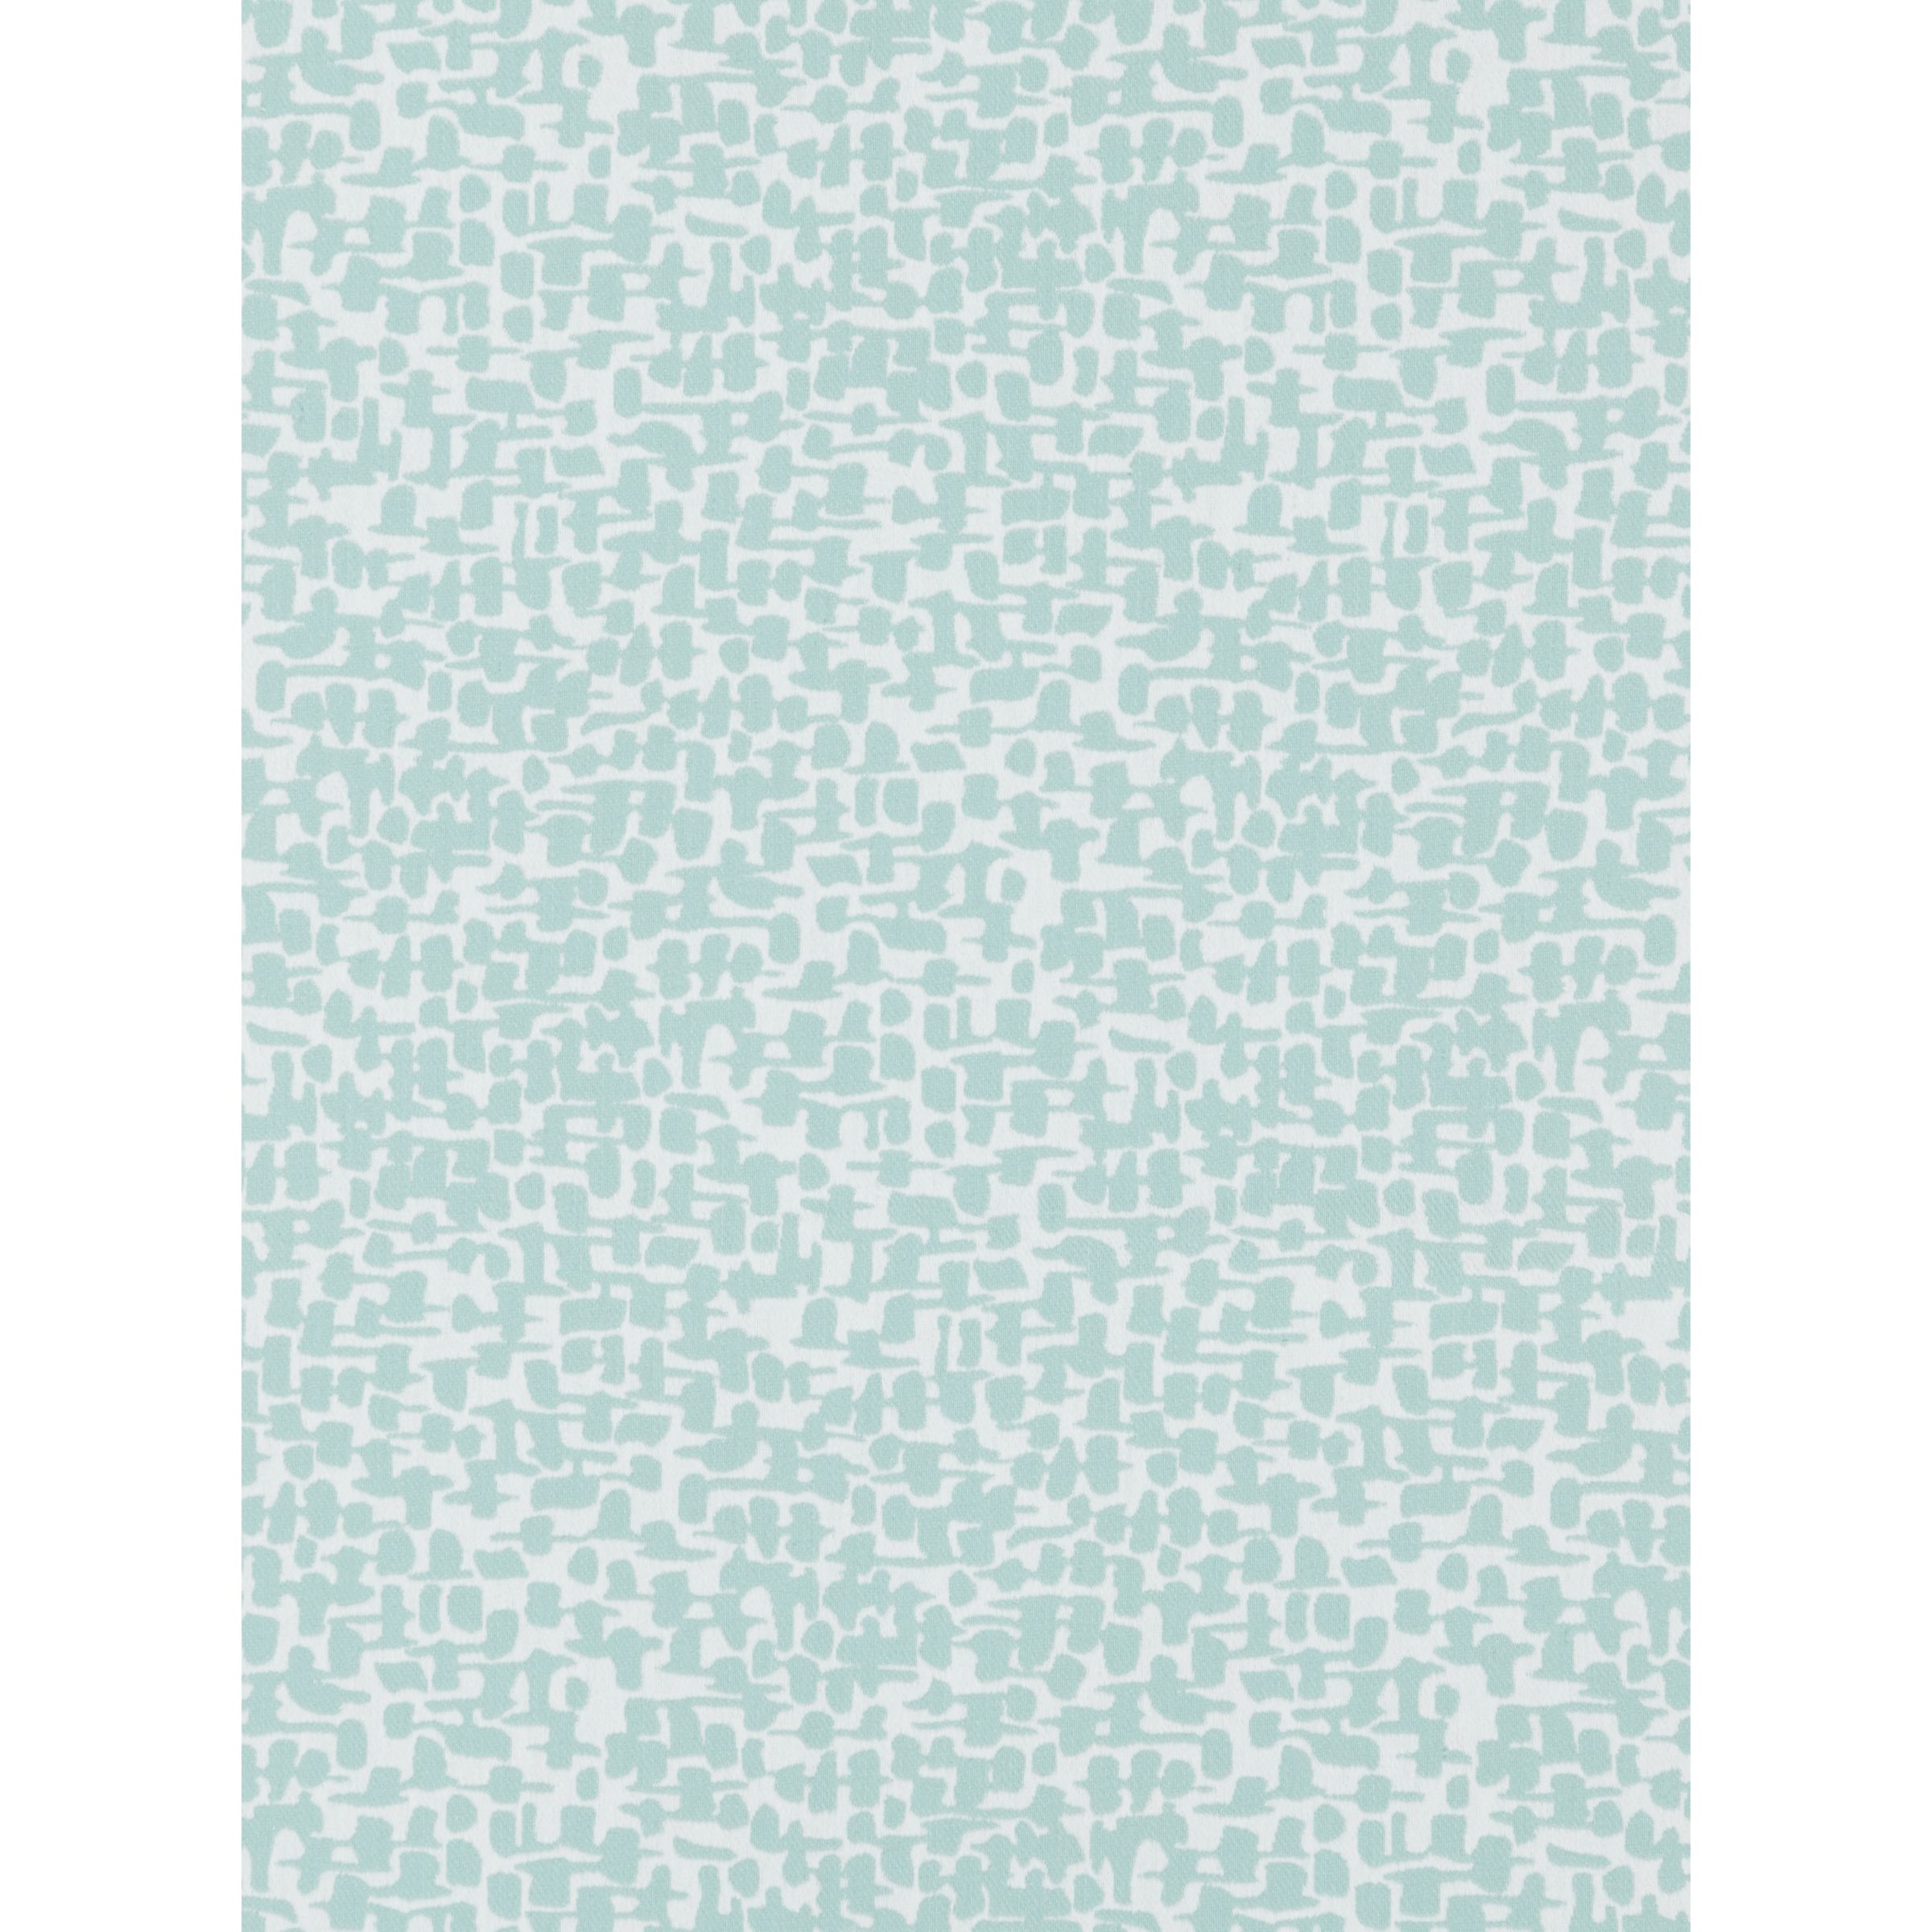 John Lewis Yin Made to Measure Curtains, Dusty Green